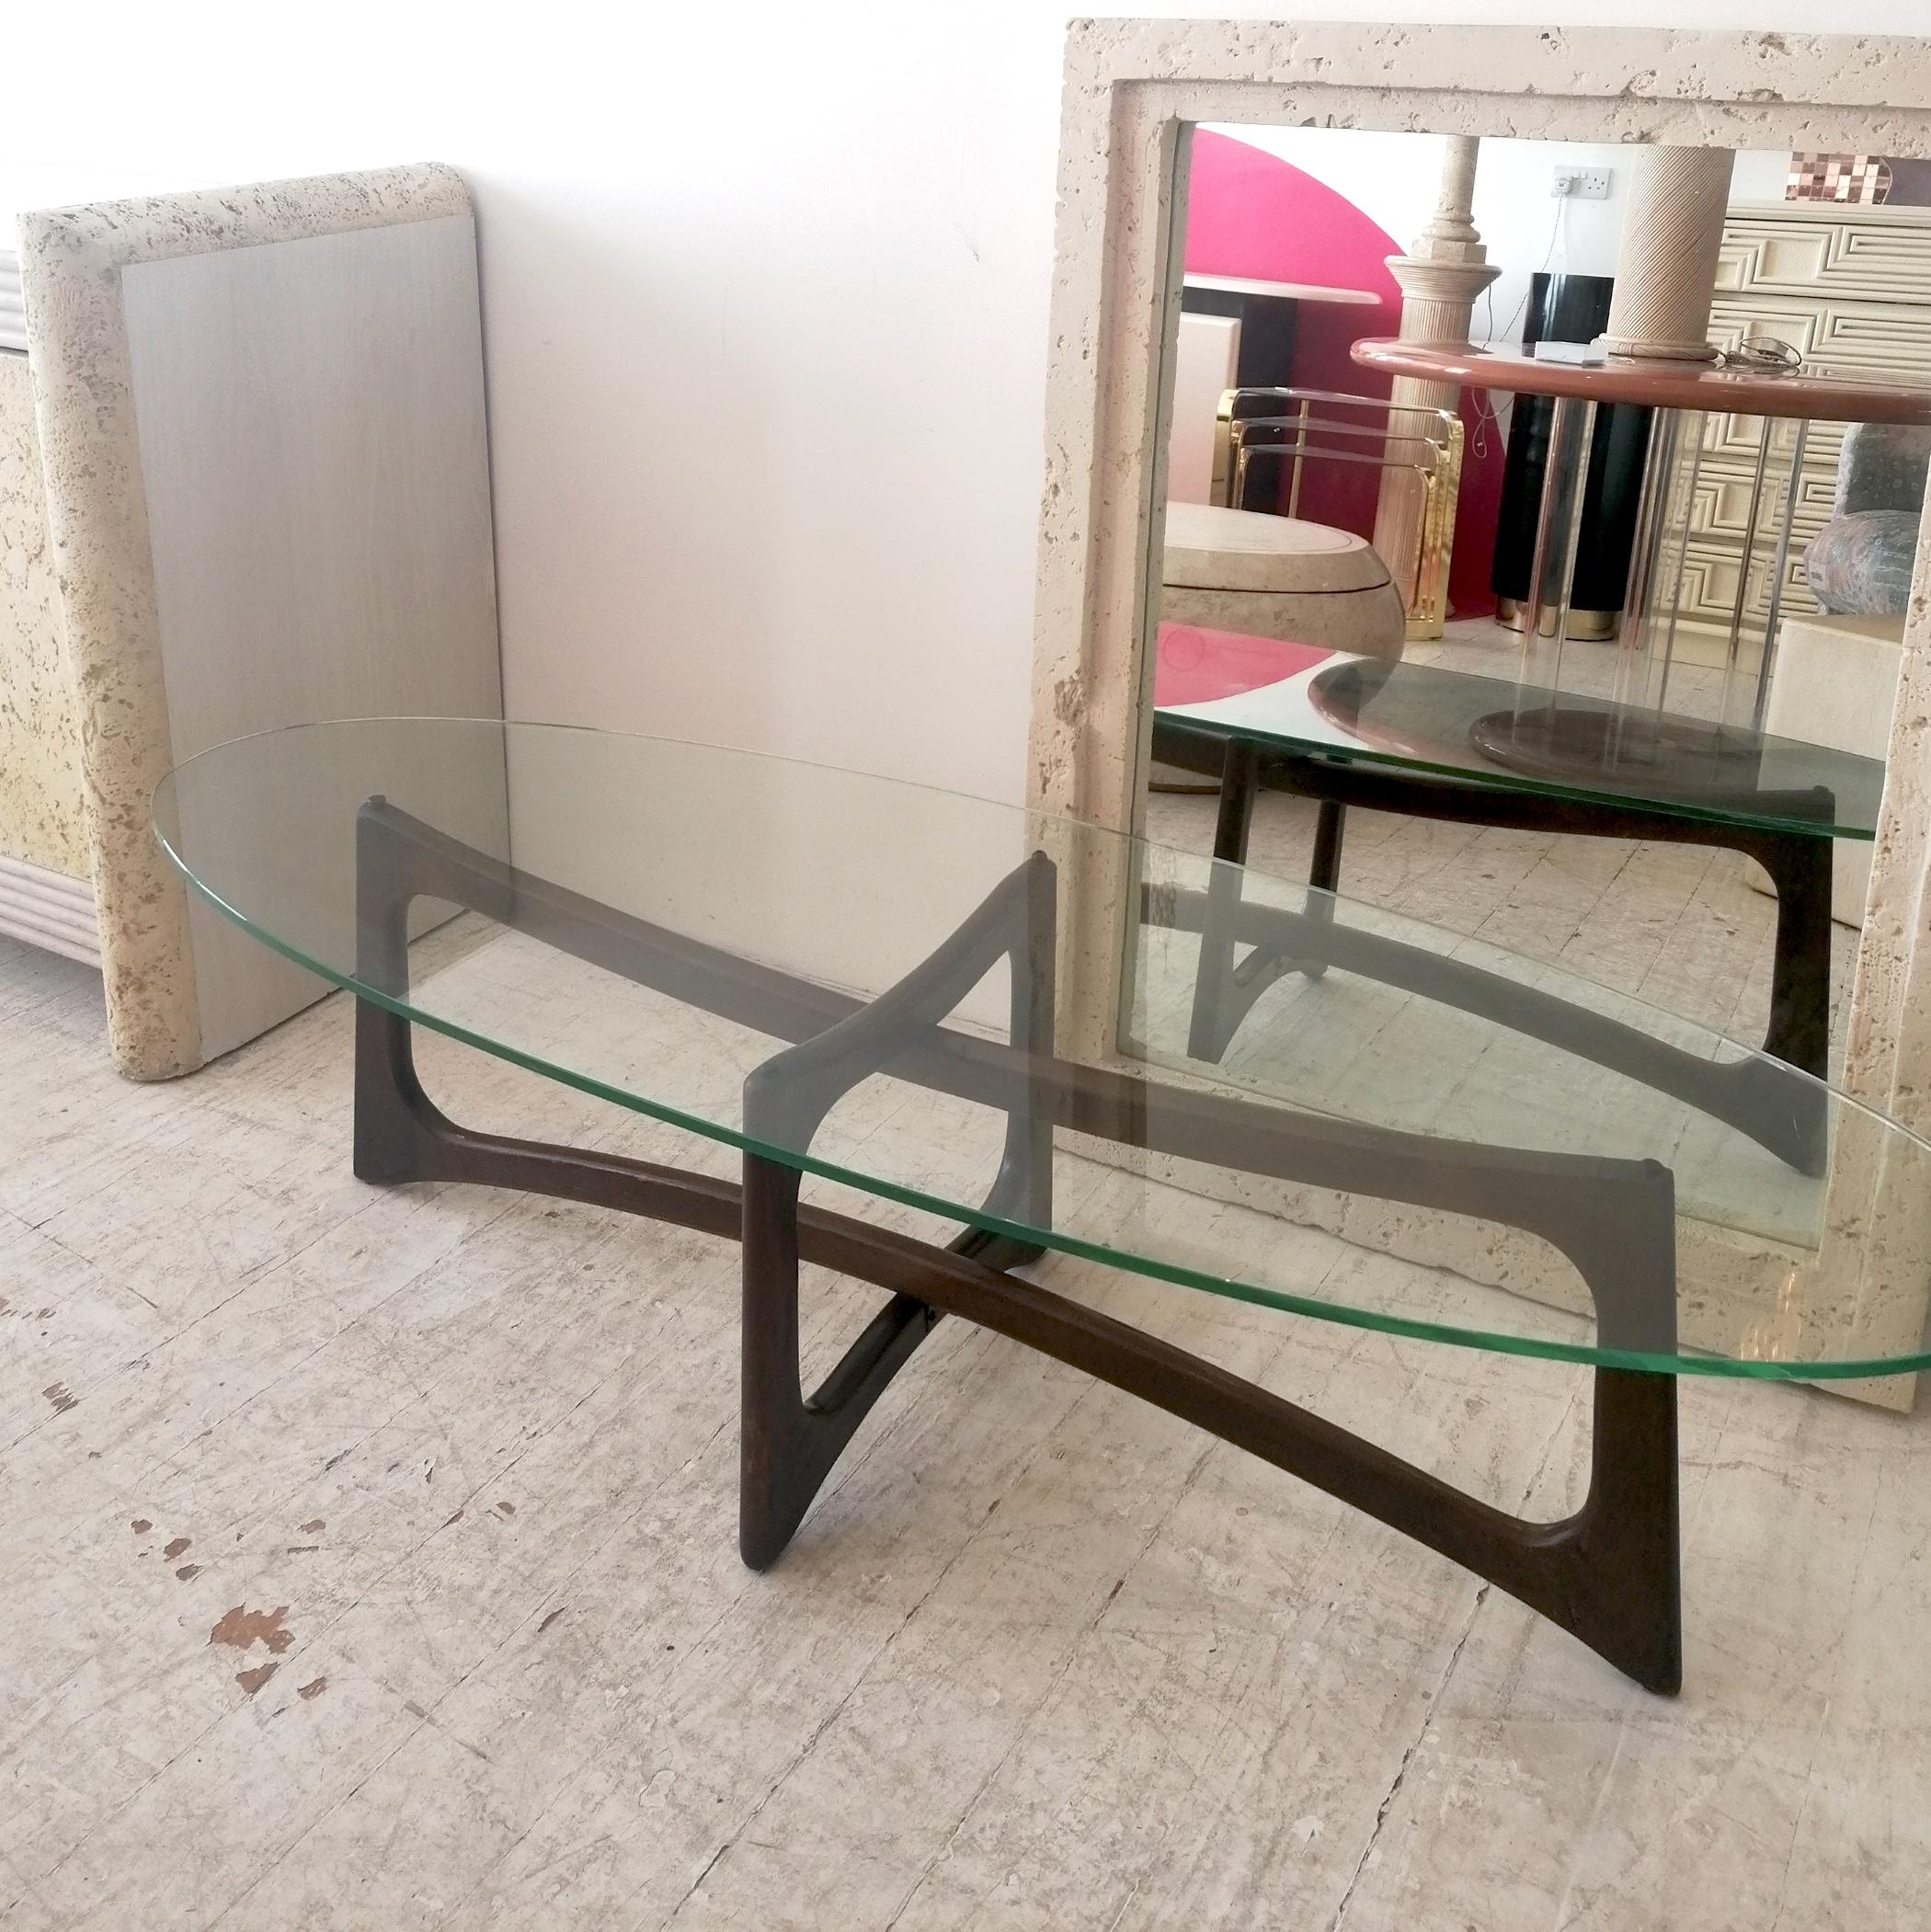 A rare 'Ribbon' coffee table by renowned designer Adrian Pearsall for Craft Associates, USA 1960s. The sculptural walnut base supports a thick oval glass top. No maker's label, but it's a well-documented piece.

Dimensions: width 150cm, depth